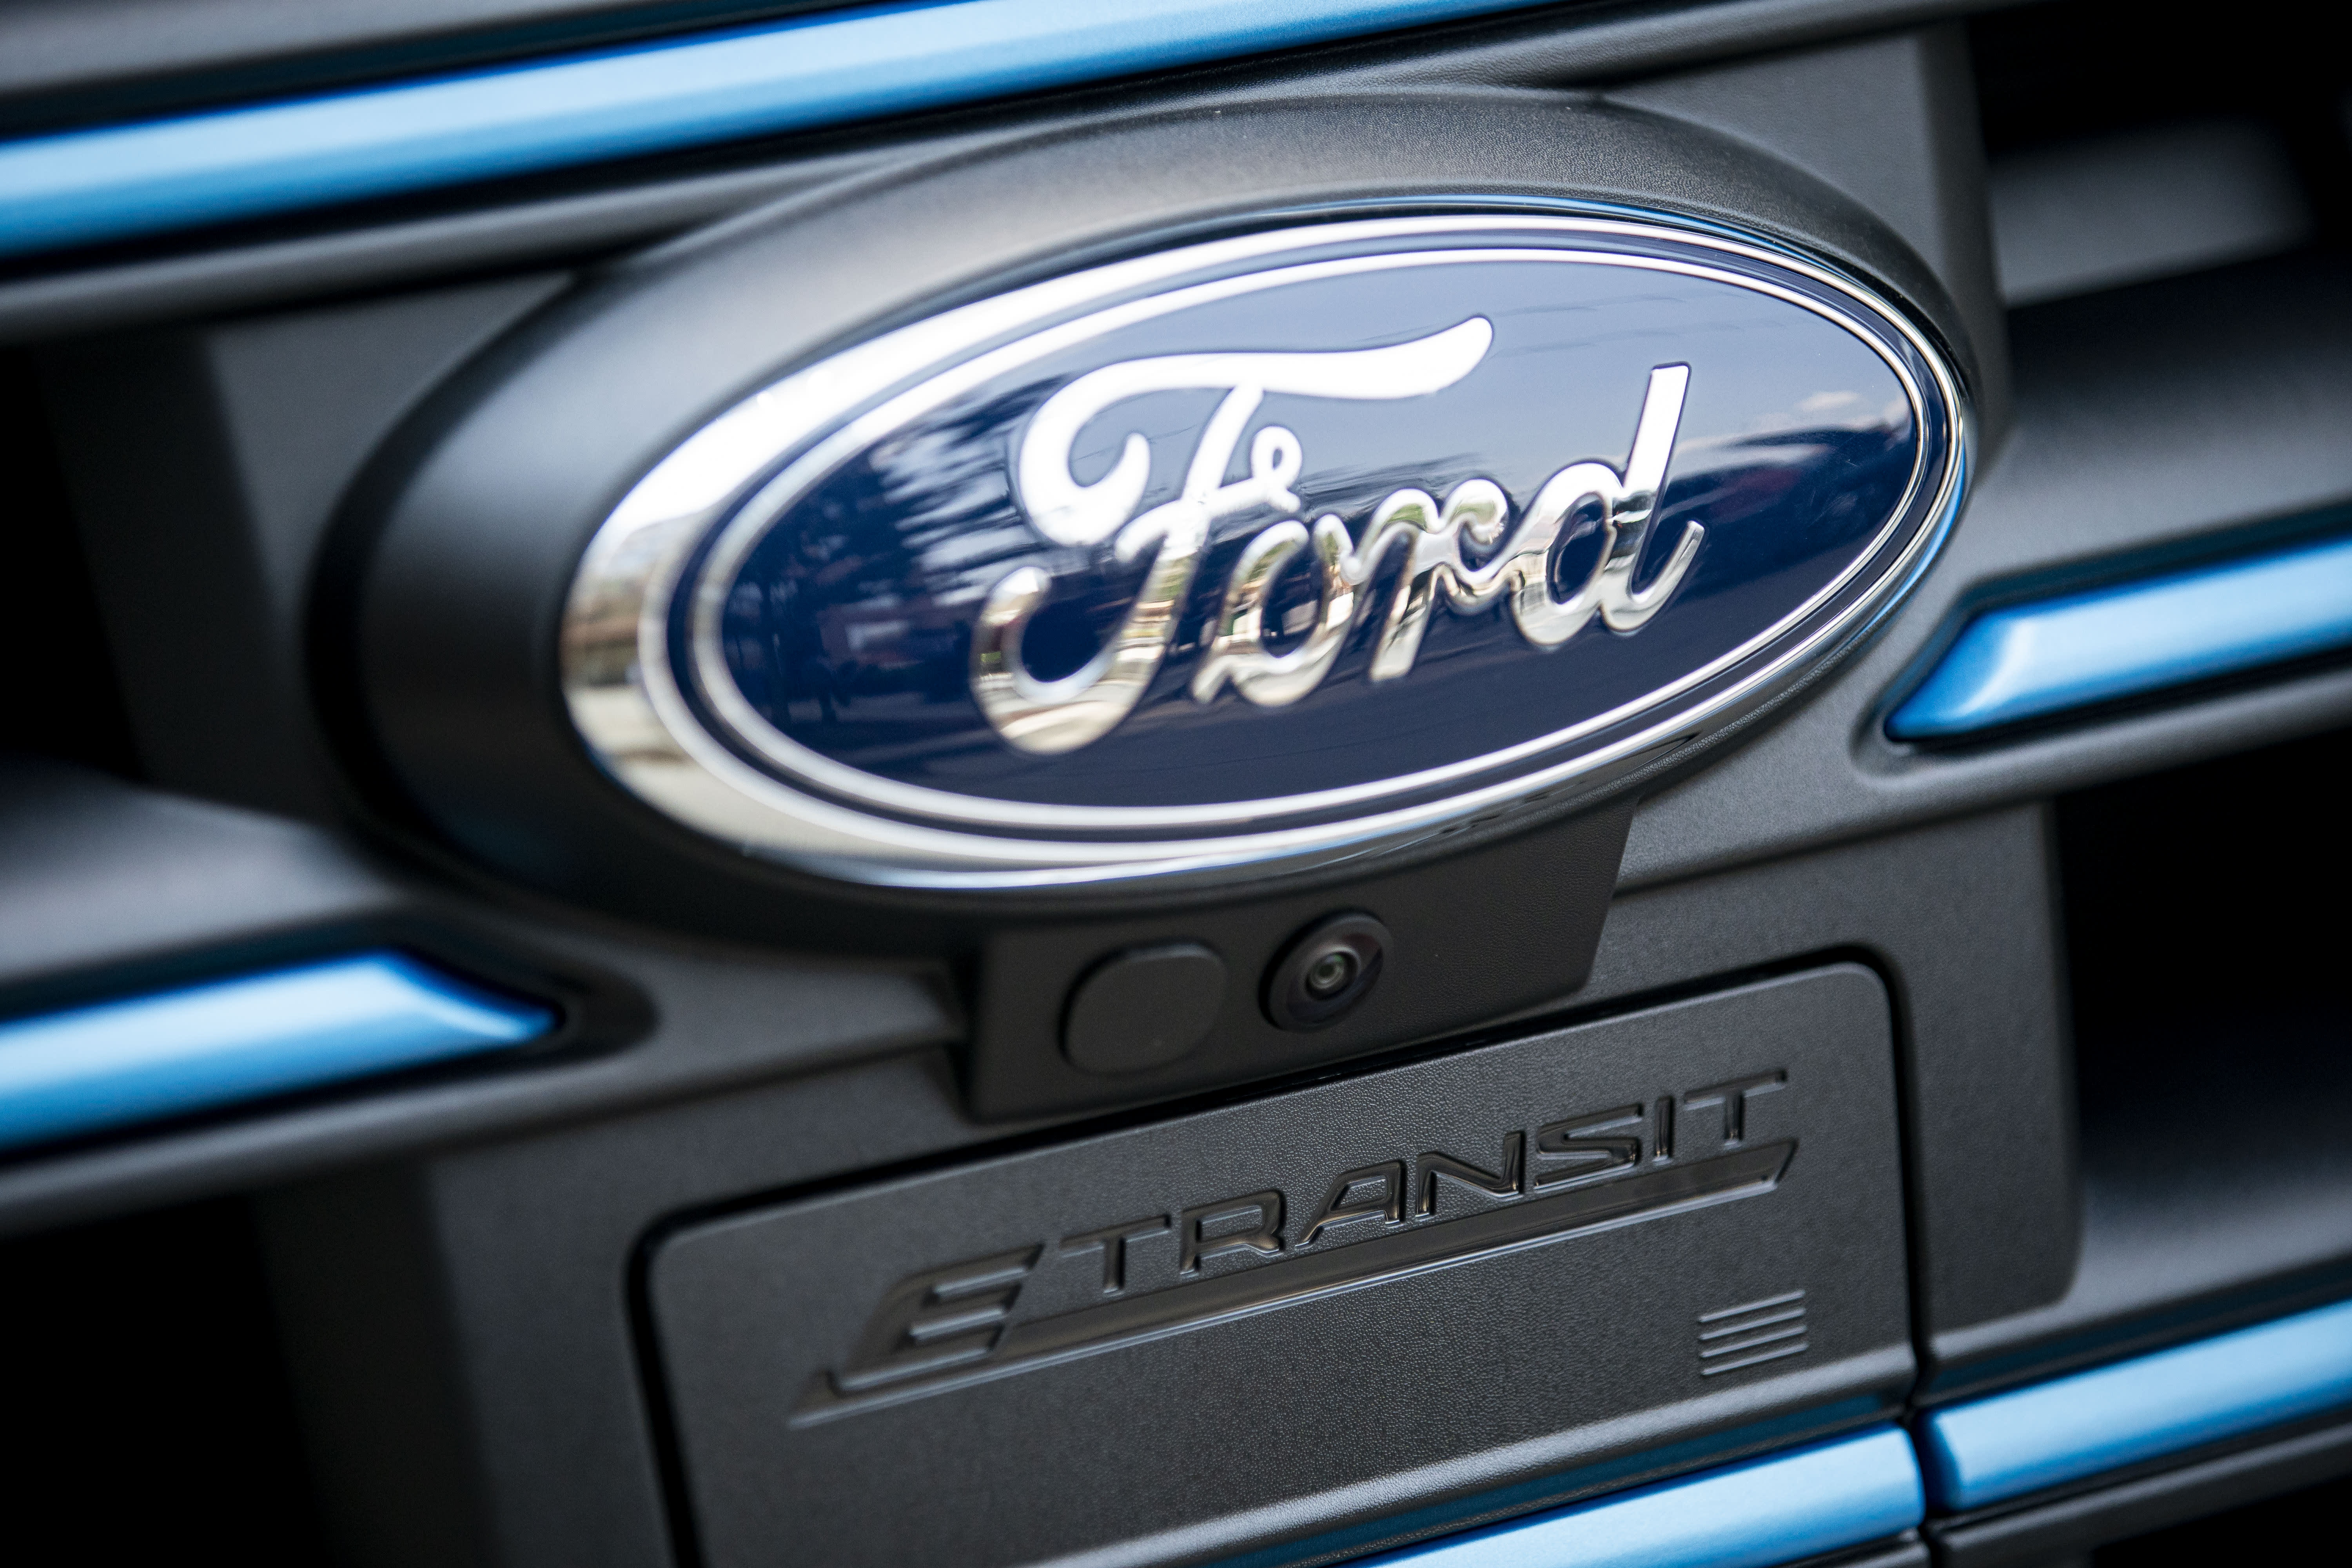 Ford shatters Wall Street’s earnings expectations, raises guidance for the year on new vehicle demand Auto Recent